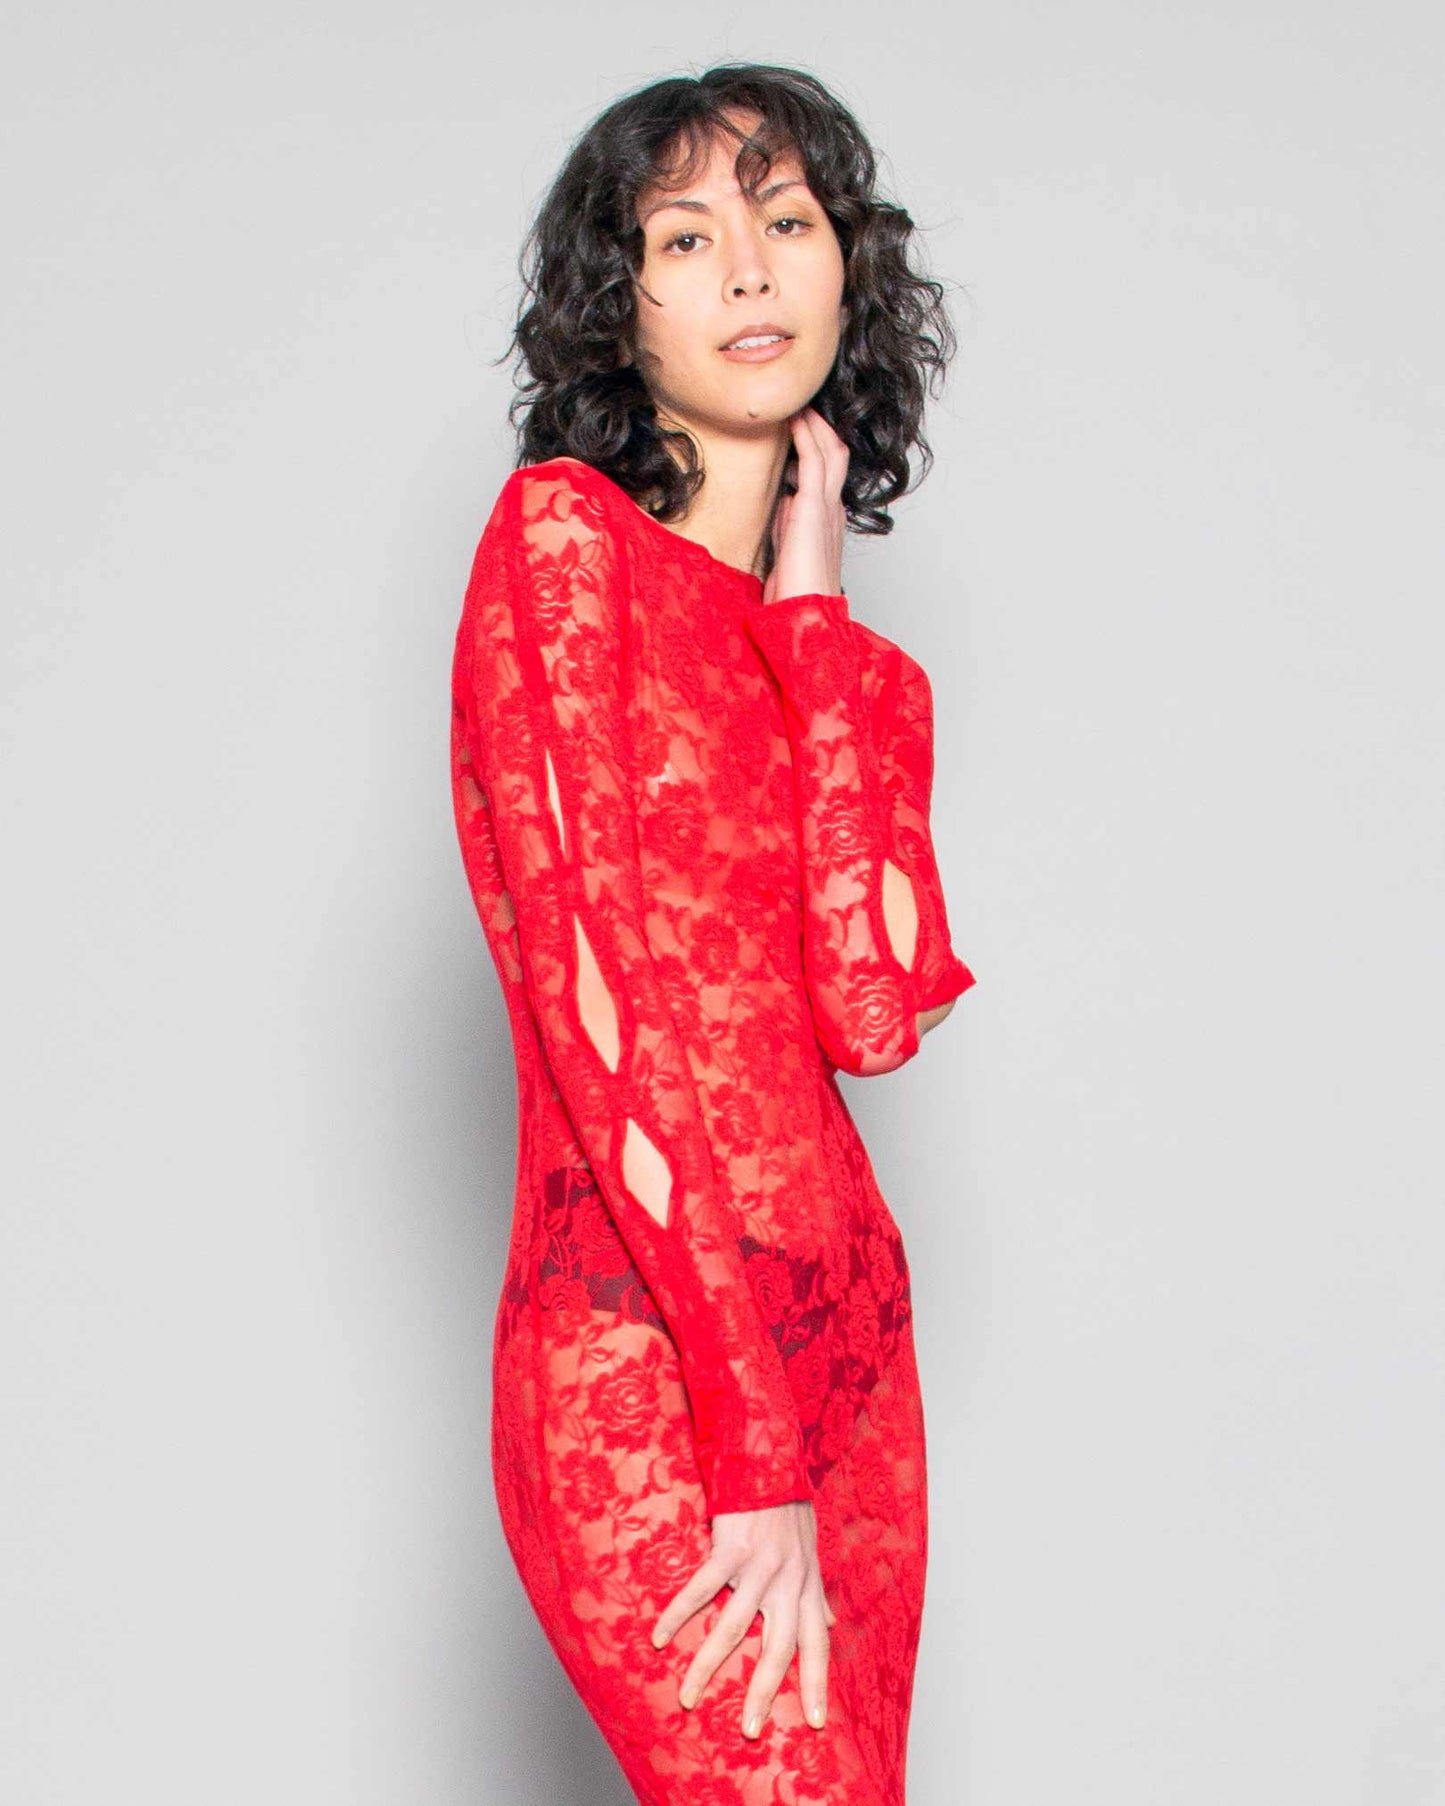 HEATHER STANKO Slashed Sleeve Lace Dress in Cherry available at Lahn.shop